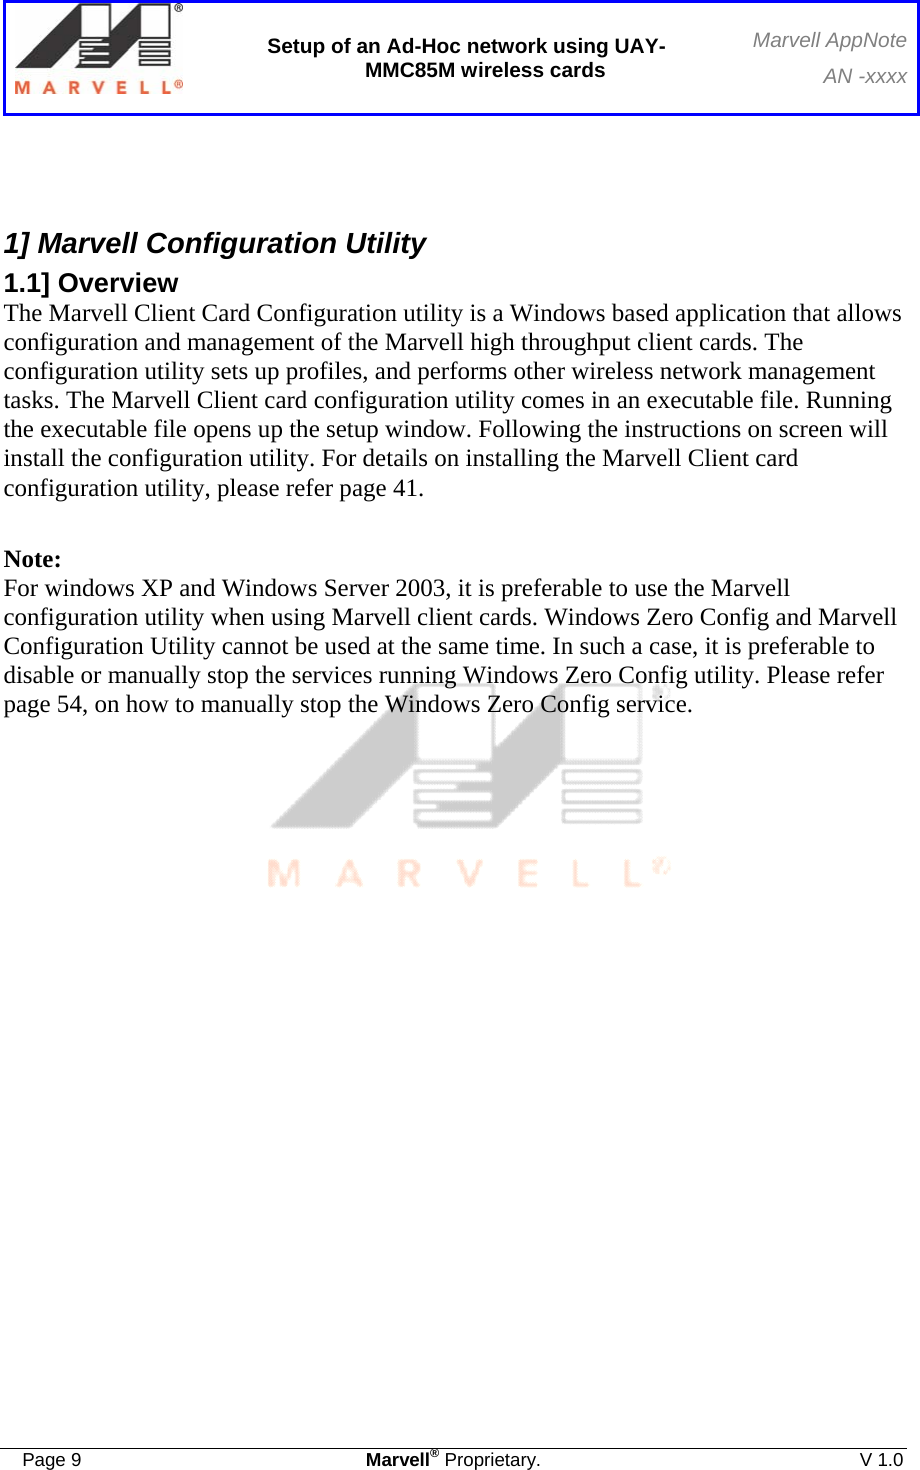  Setup of an Ad-Hoc network using UAY-MMC85M wireless cards Marvell AppNoteAN -xxxx  Page 9  Marvell® Proprietary.  V 1.0    1] Marvell Configuration Utility 1.1] Overview The Marvell Client Card Configuration utility is a Windows based application that allows configuration and management of the Marvell high throughput client cards. The configuration utility sets up profiles, and performs other wireless network management tasks. The Marvell Client card configuration utility comes in an executable file. Running the executable file opens up the setup window. Following the instructions on screen will install the configuration utility. For details on installing the Marvell Client card configuration utility, please refer page 41.  Note: For windows XP and Windows Server 2003, it is preferable to use the Marvell configuration utility when using Marvell client cards. Windows Zero Config and Marvell Configuration Utility cannot be used at the same time. In such a case, it is preferable to disable or manually stop the services running Windows Zero Config utility. Please refer page 54, on how to manually stop the Windows Zero Config service.            